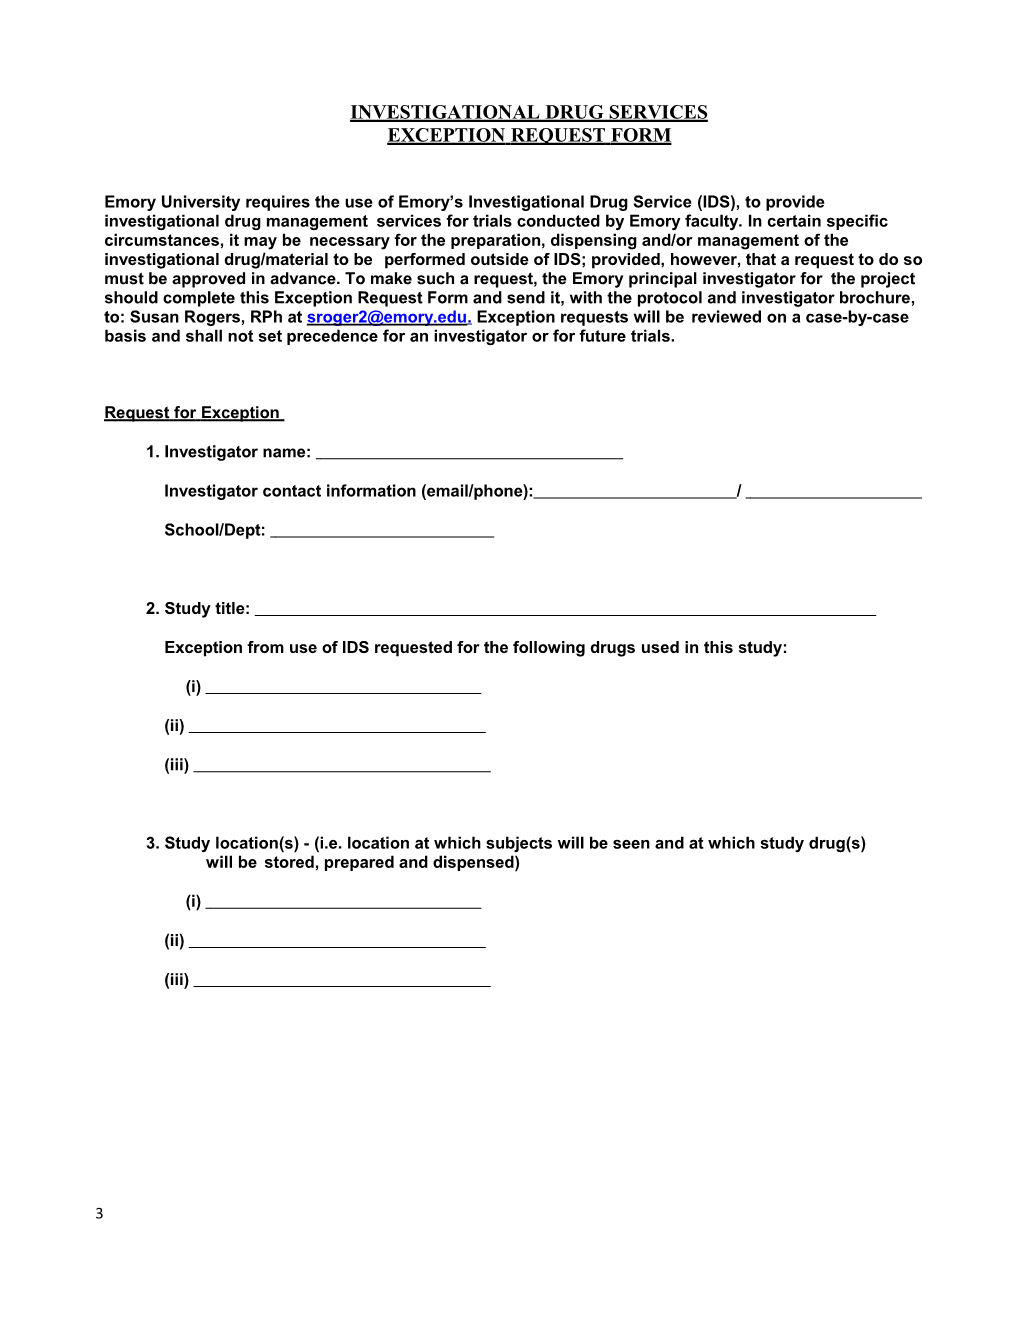 IDS Waiver Request Form 110907-1